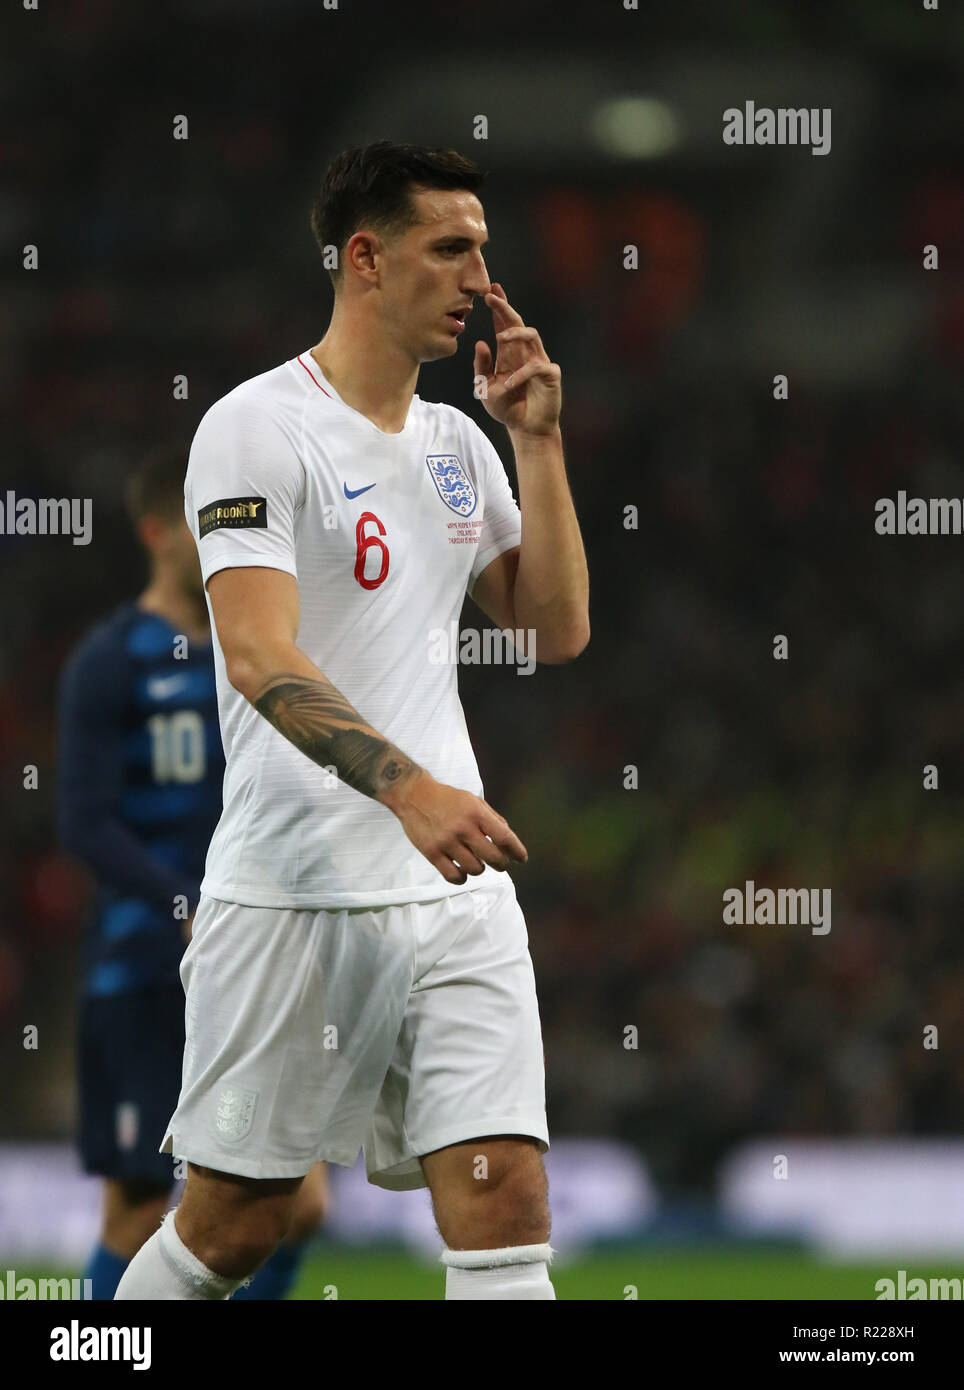 London, UK. 15th November, 2018. Lewis Dunk (E) at the England v USA game (Wayne Rooney's last England game) at Wembley Stadium, London, November 15, 2018. **This picture is for editorial use ONLY** Credit: Paul Marriott/Alamy Live News Stock Photo